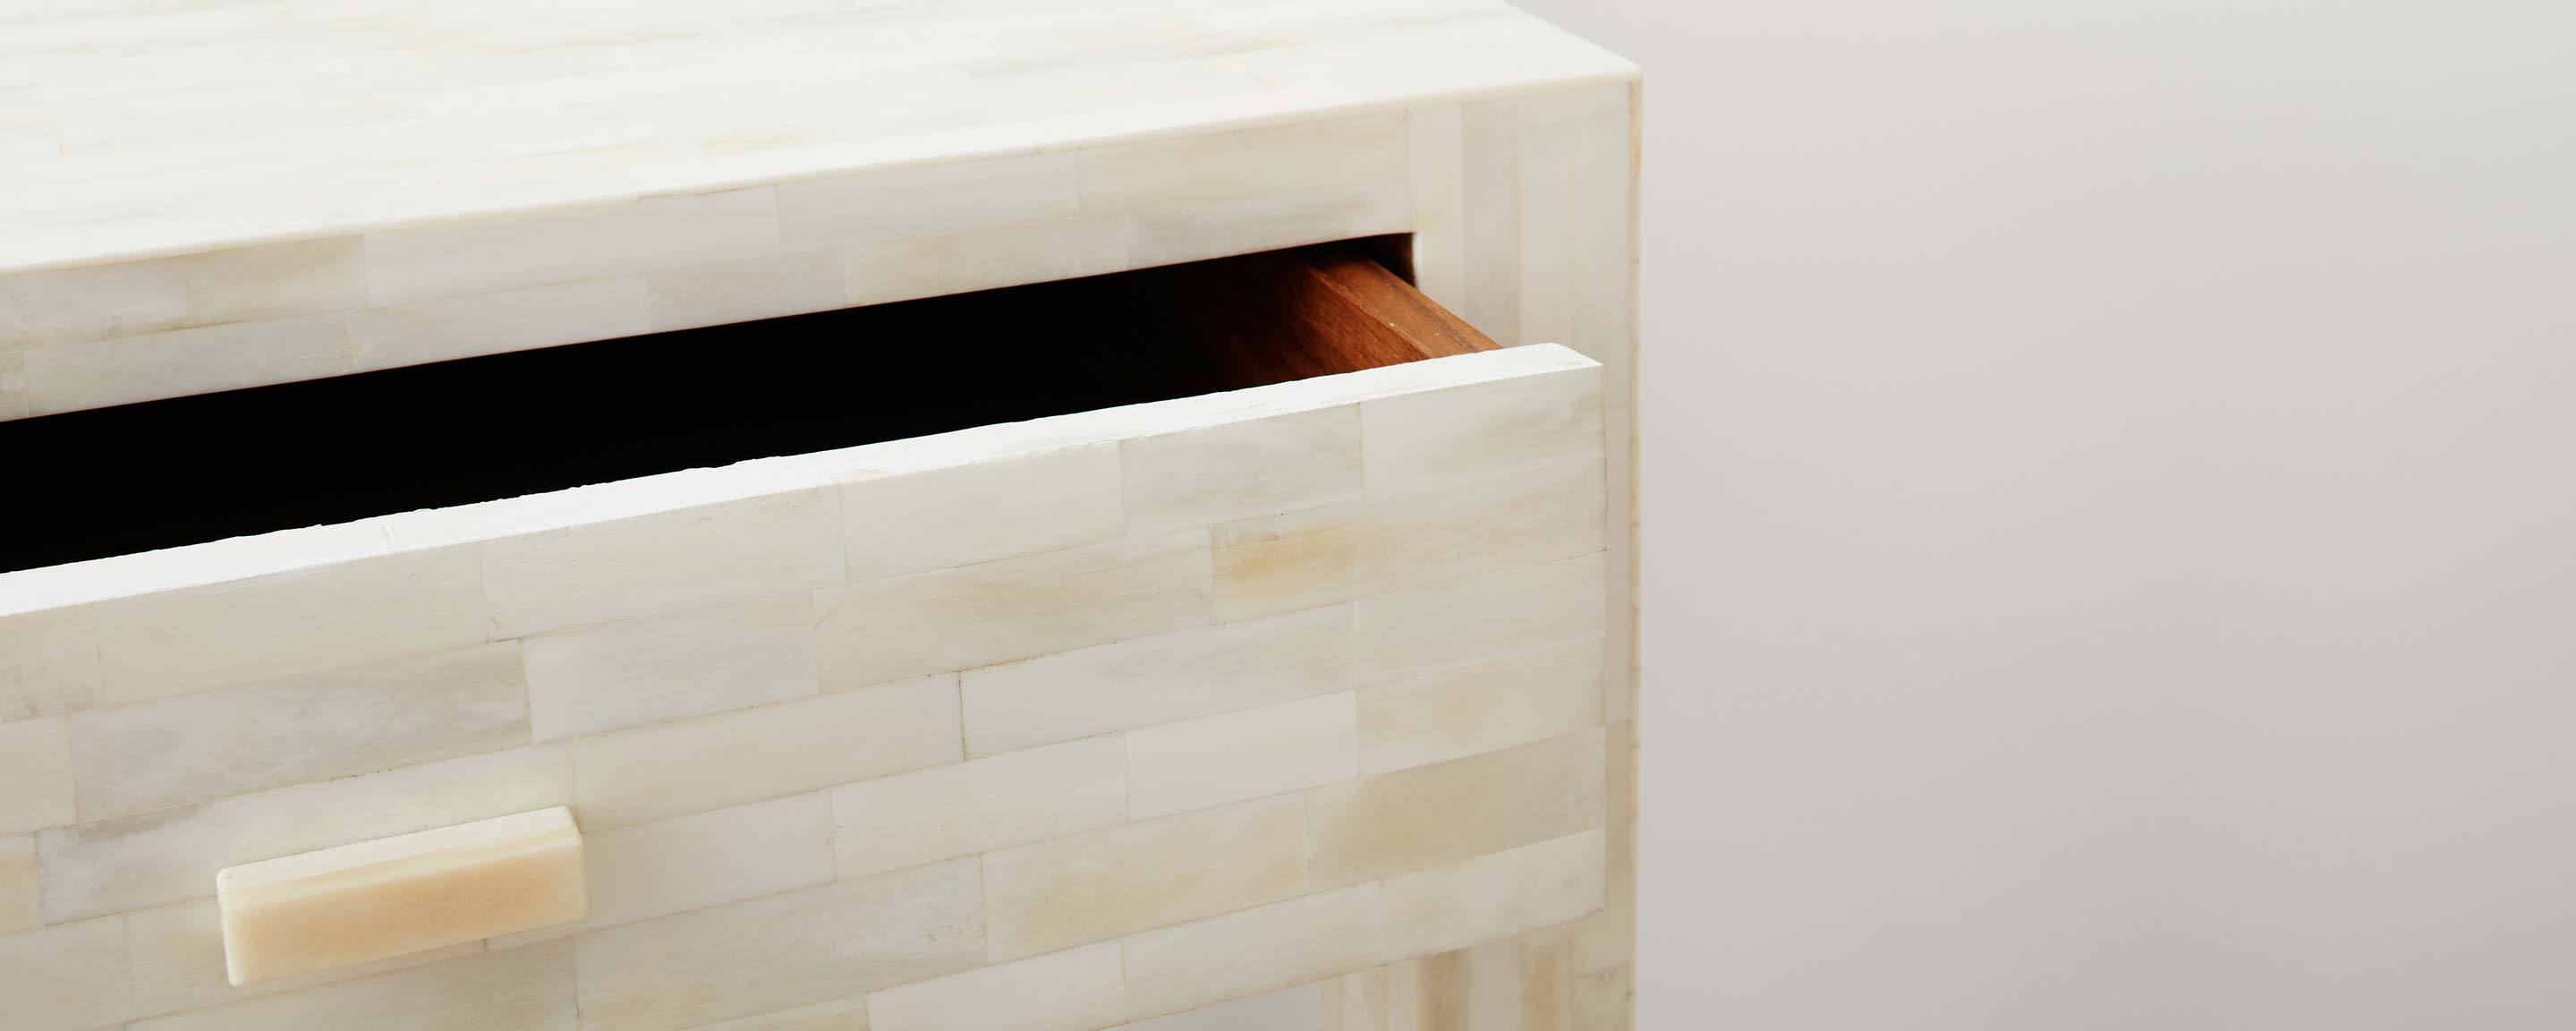 the white bone square end table with drawer